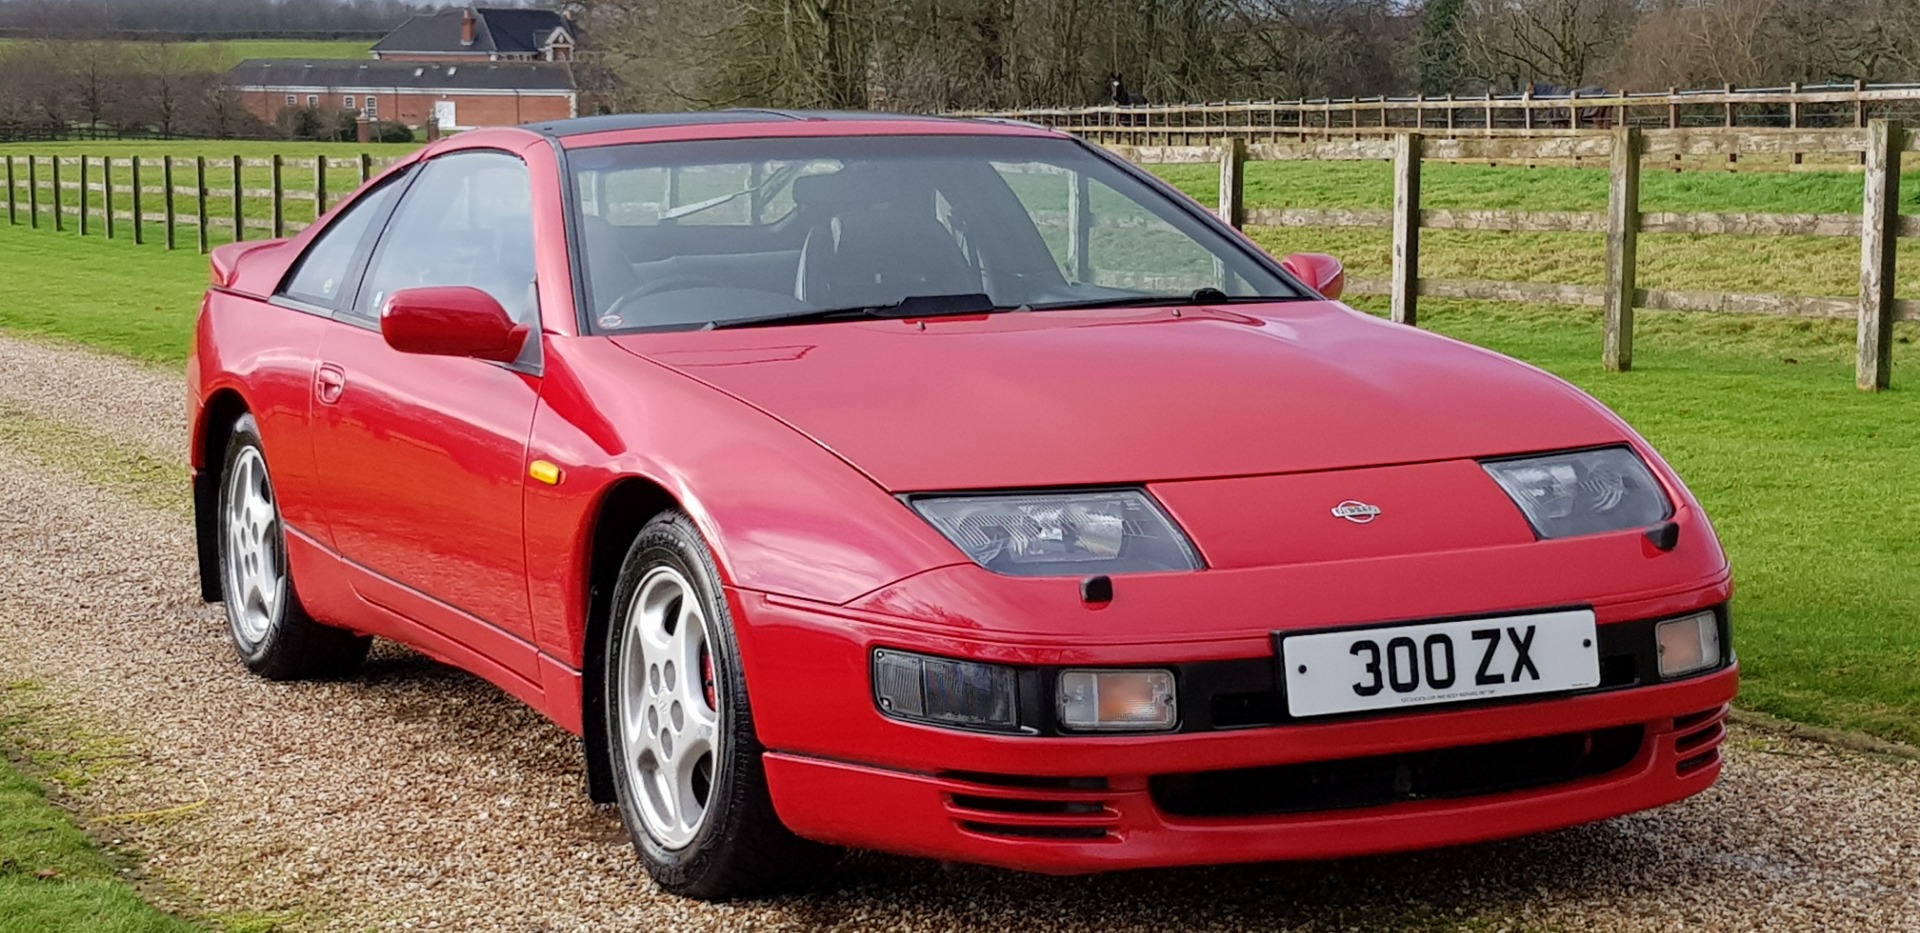 Used NISSAN 300 ZX 300 ZX TWIN TURBO UK CAR, RED WITH BLACK 